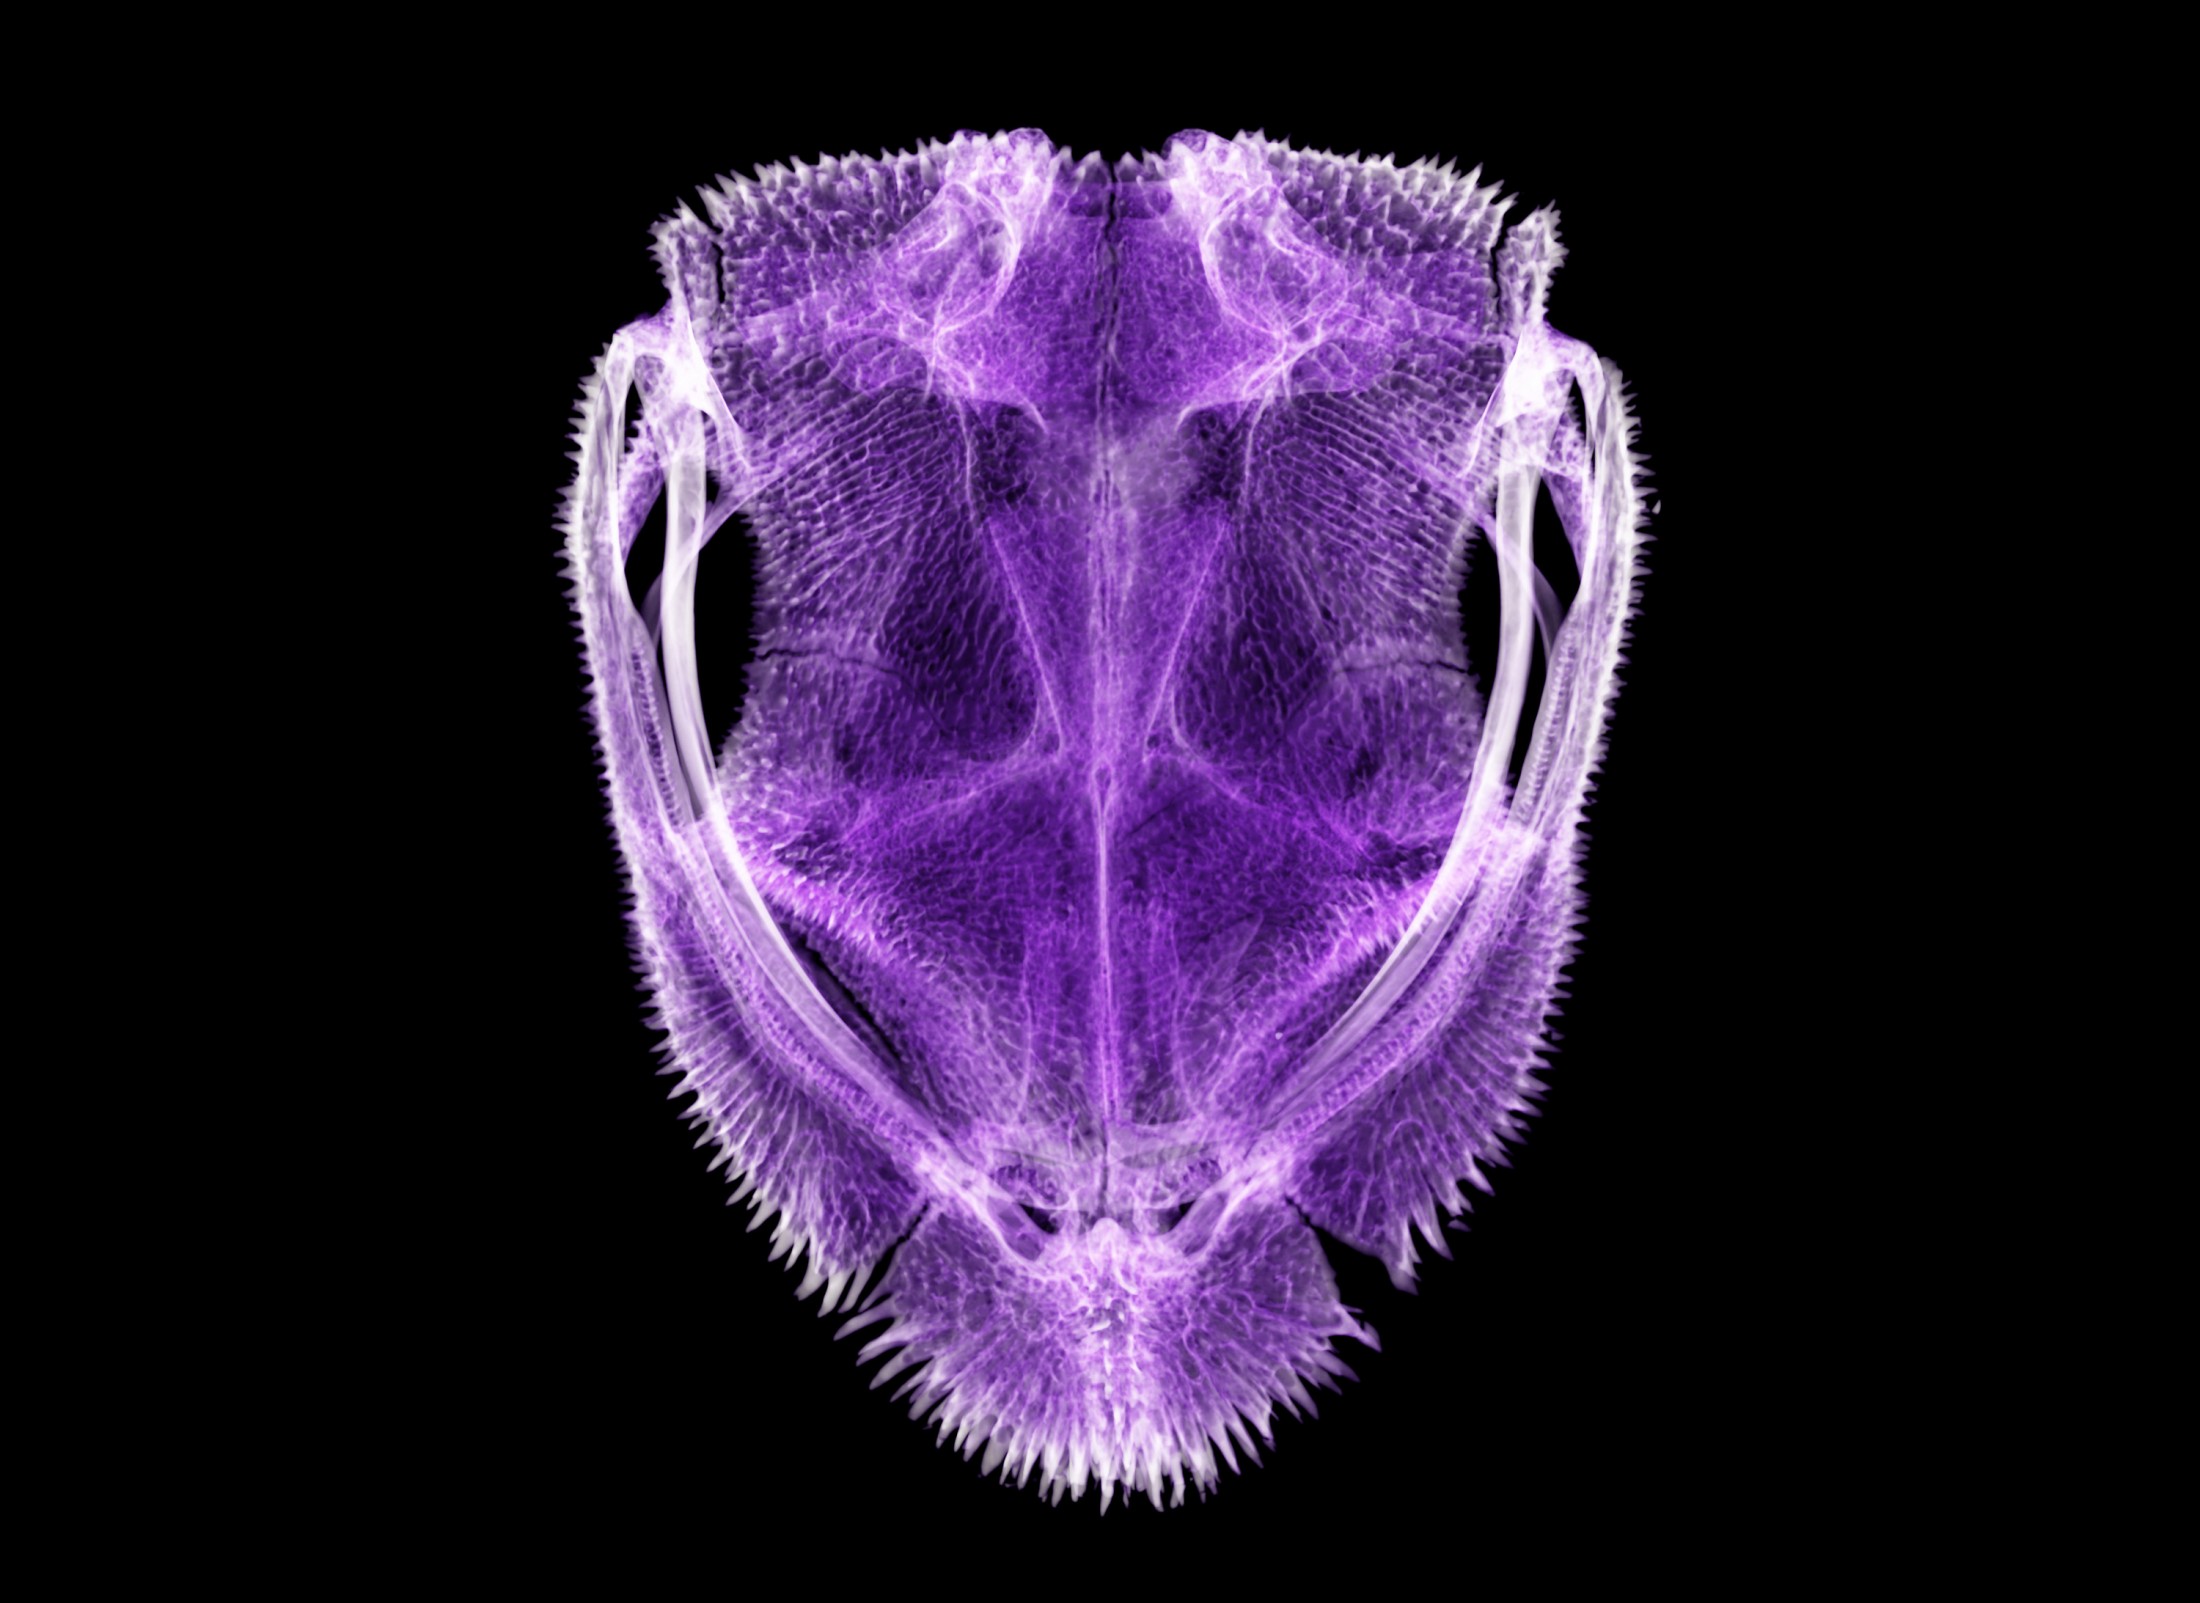 color-added scan of frog skull shows spikes on 